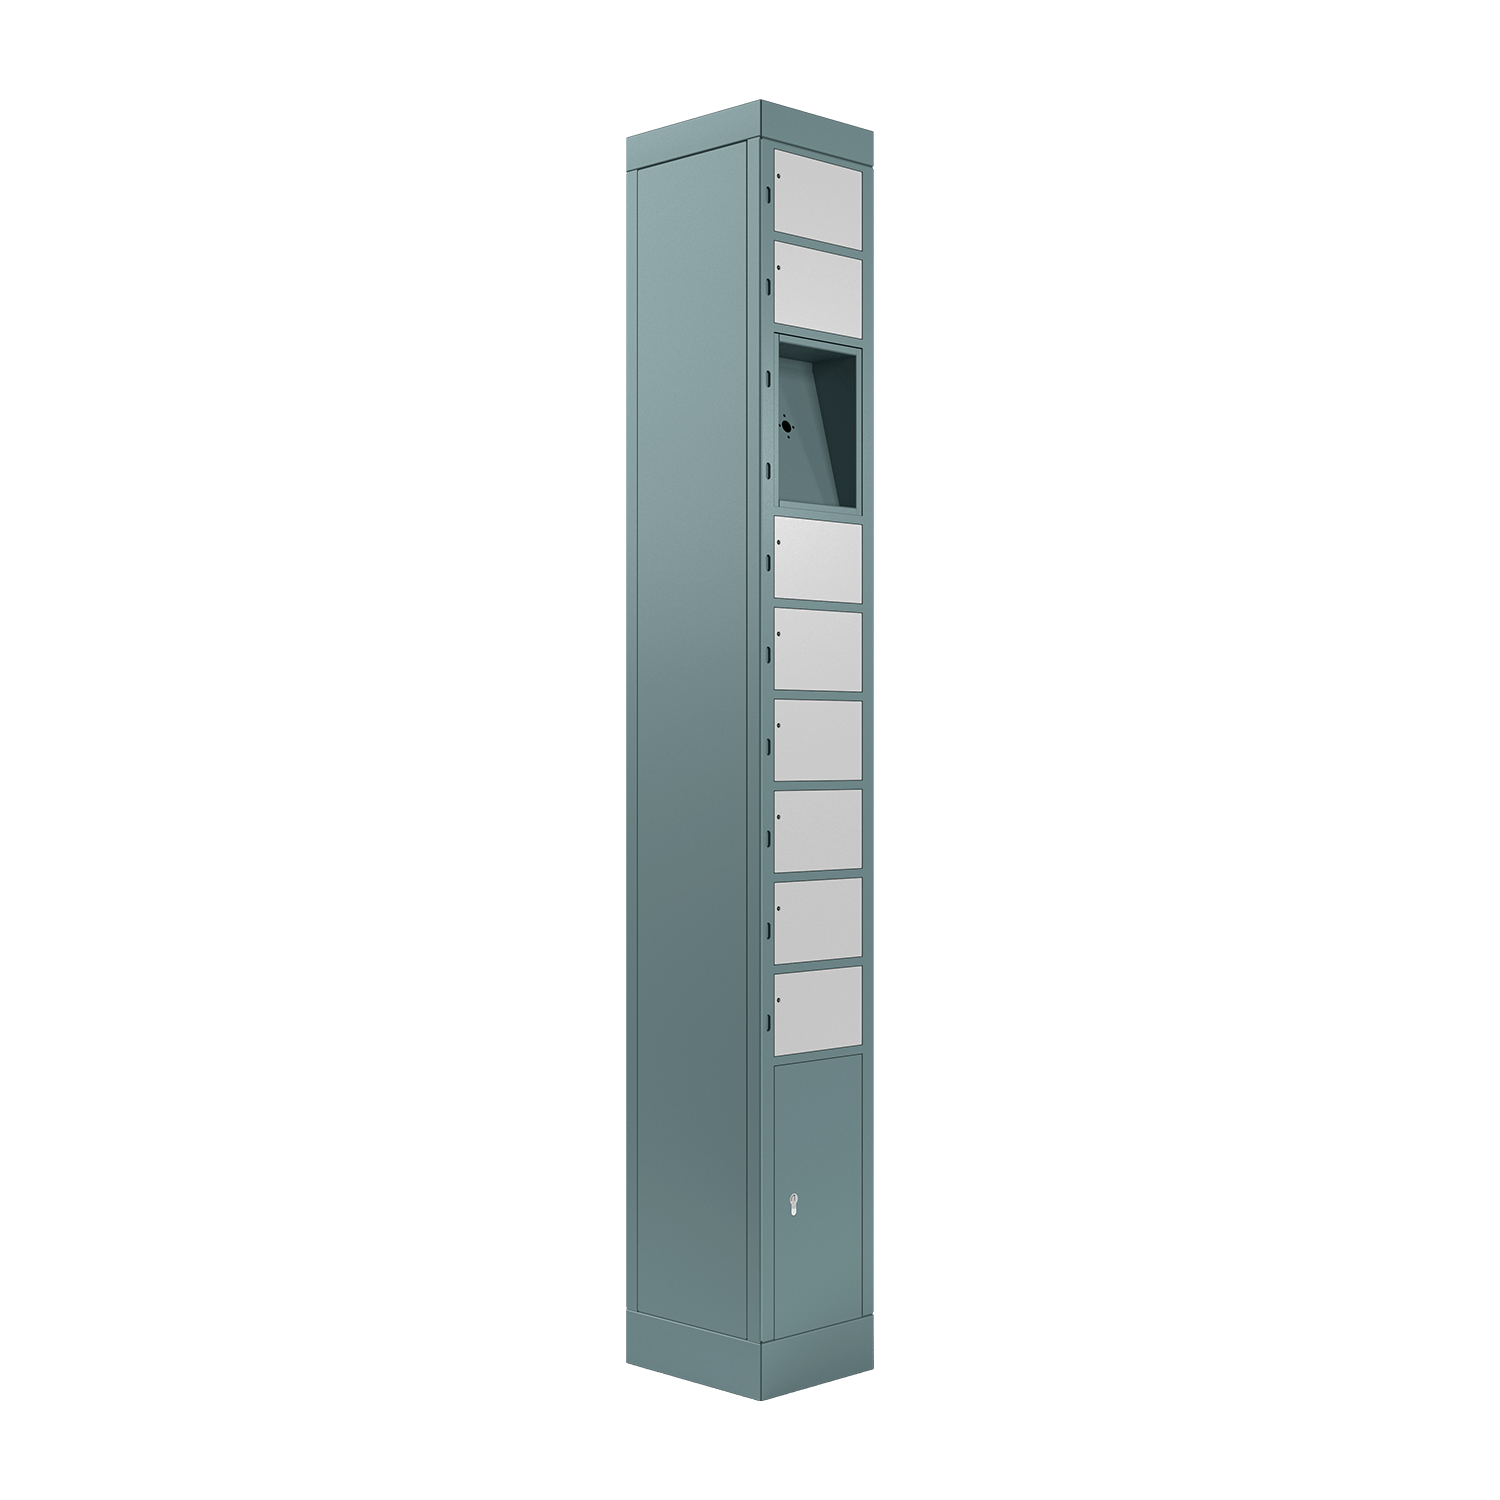 locker compartment system, size S, with 8 compartments, space for user terminal, left view